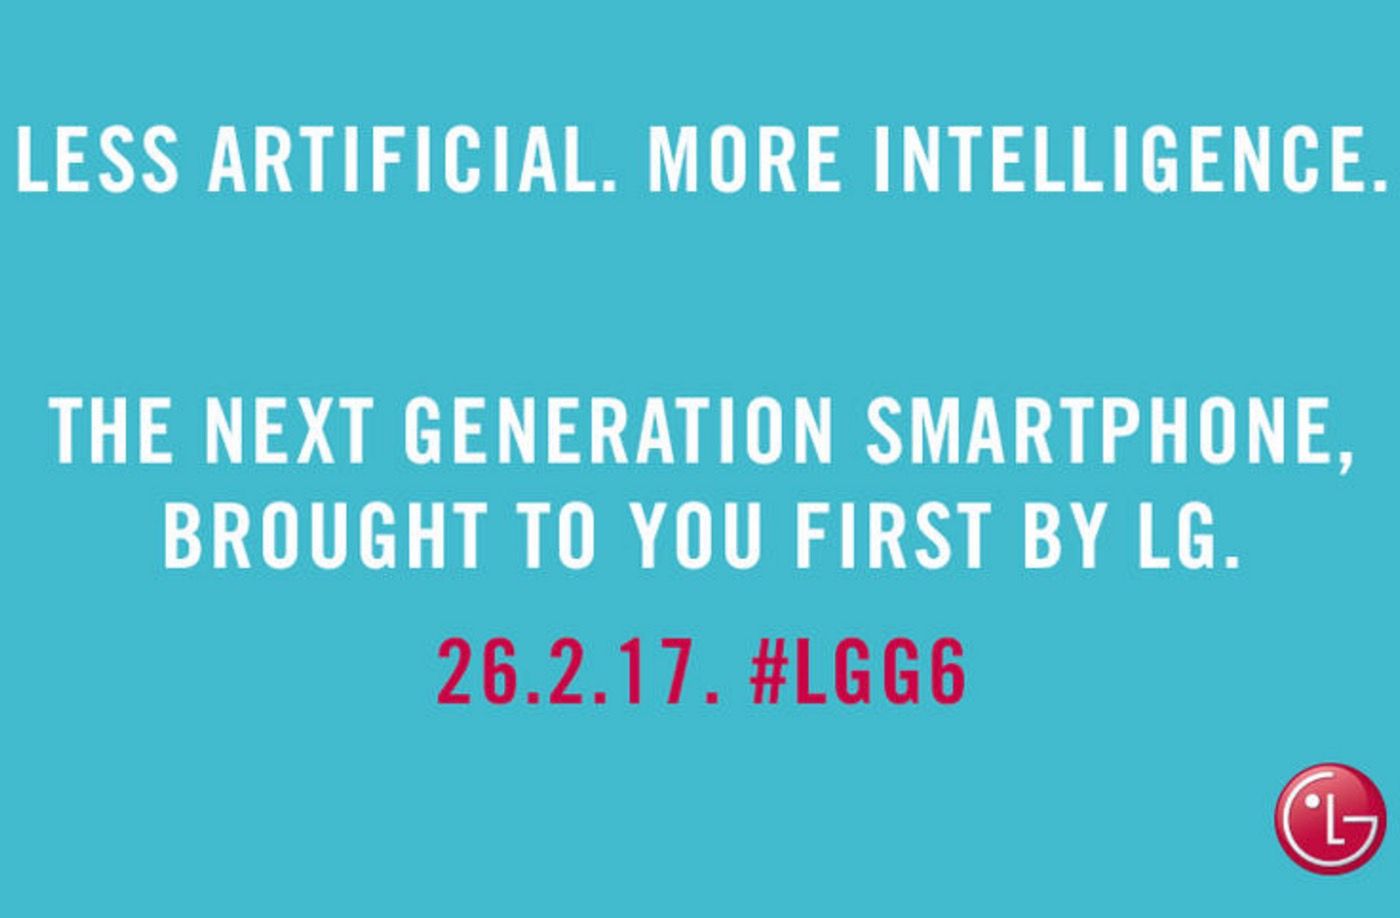 lg g6 teaser suggests phone may offer google assistant and alexa image 1